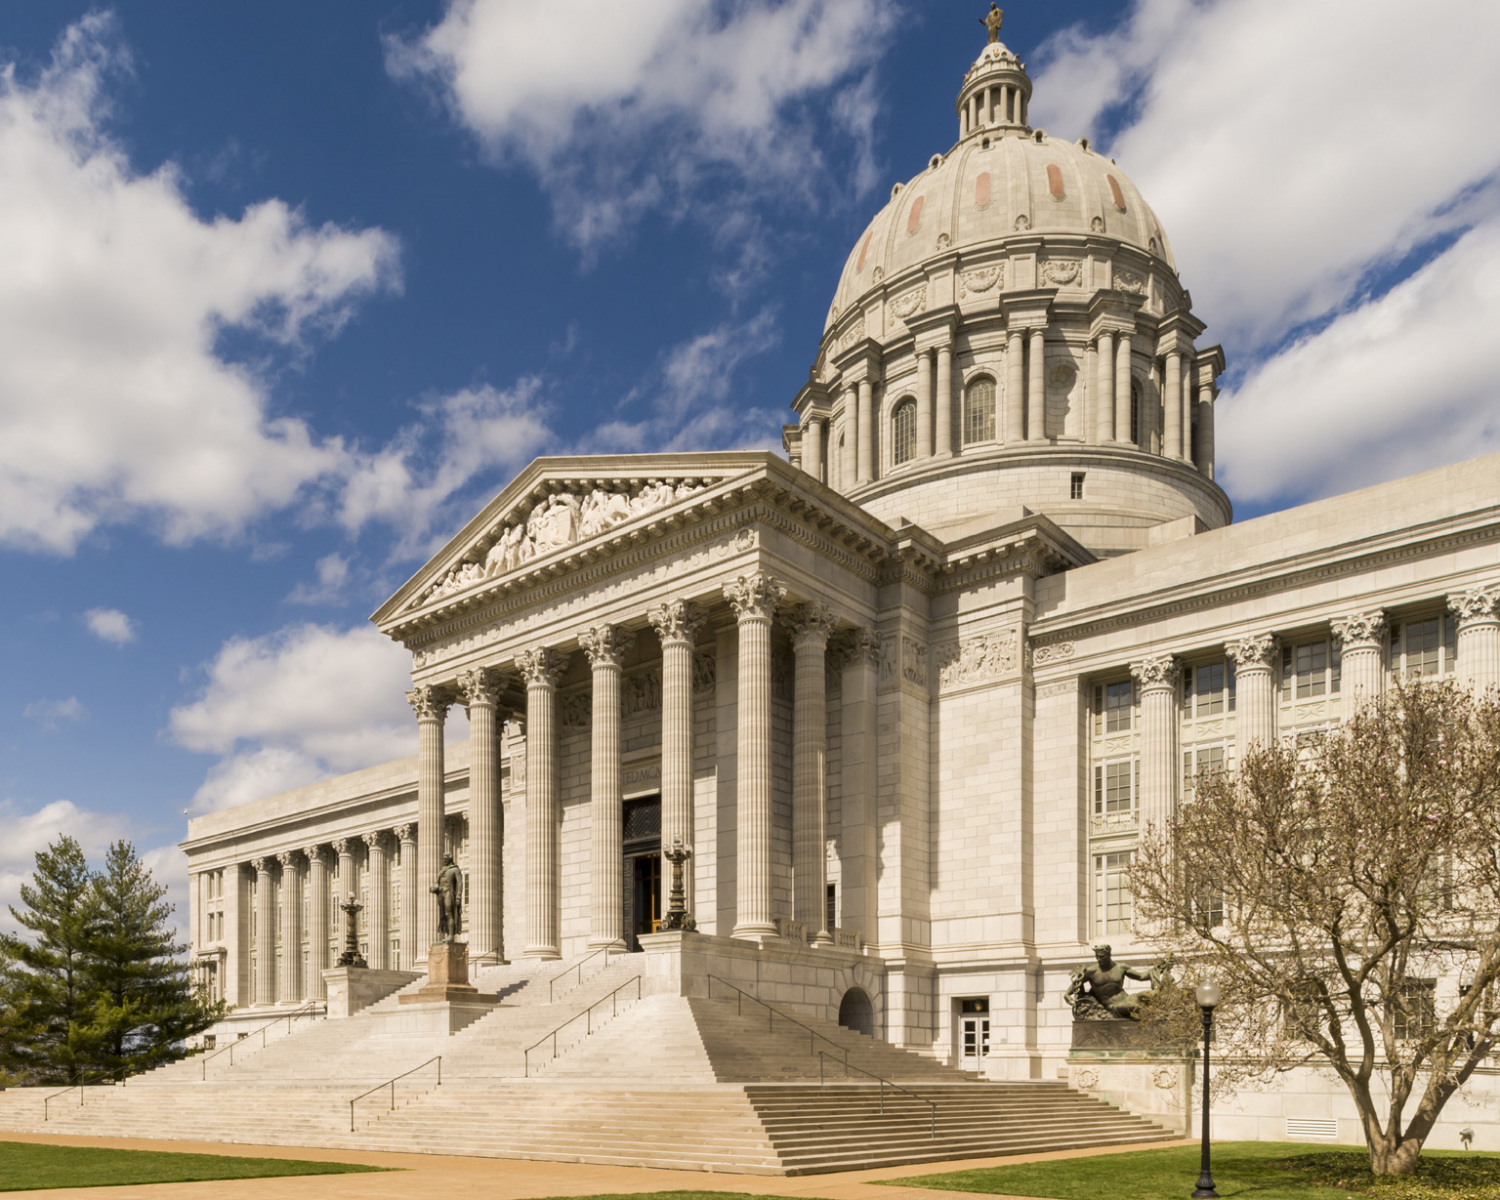 An image of the Missouri State Capitol.  The American Renaissance structure, located in Jefferson city and designed by the architectural firm of Tracy And Swartwout, was built between 1913 and 1917.  The Missouri State Capitol is listed on the National Register of Historic Places.  This image © Capitolshots Photography/TwoFiftyFour Photos, LLC, ALL RIGHTS RESERVED.